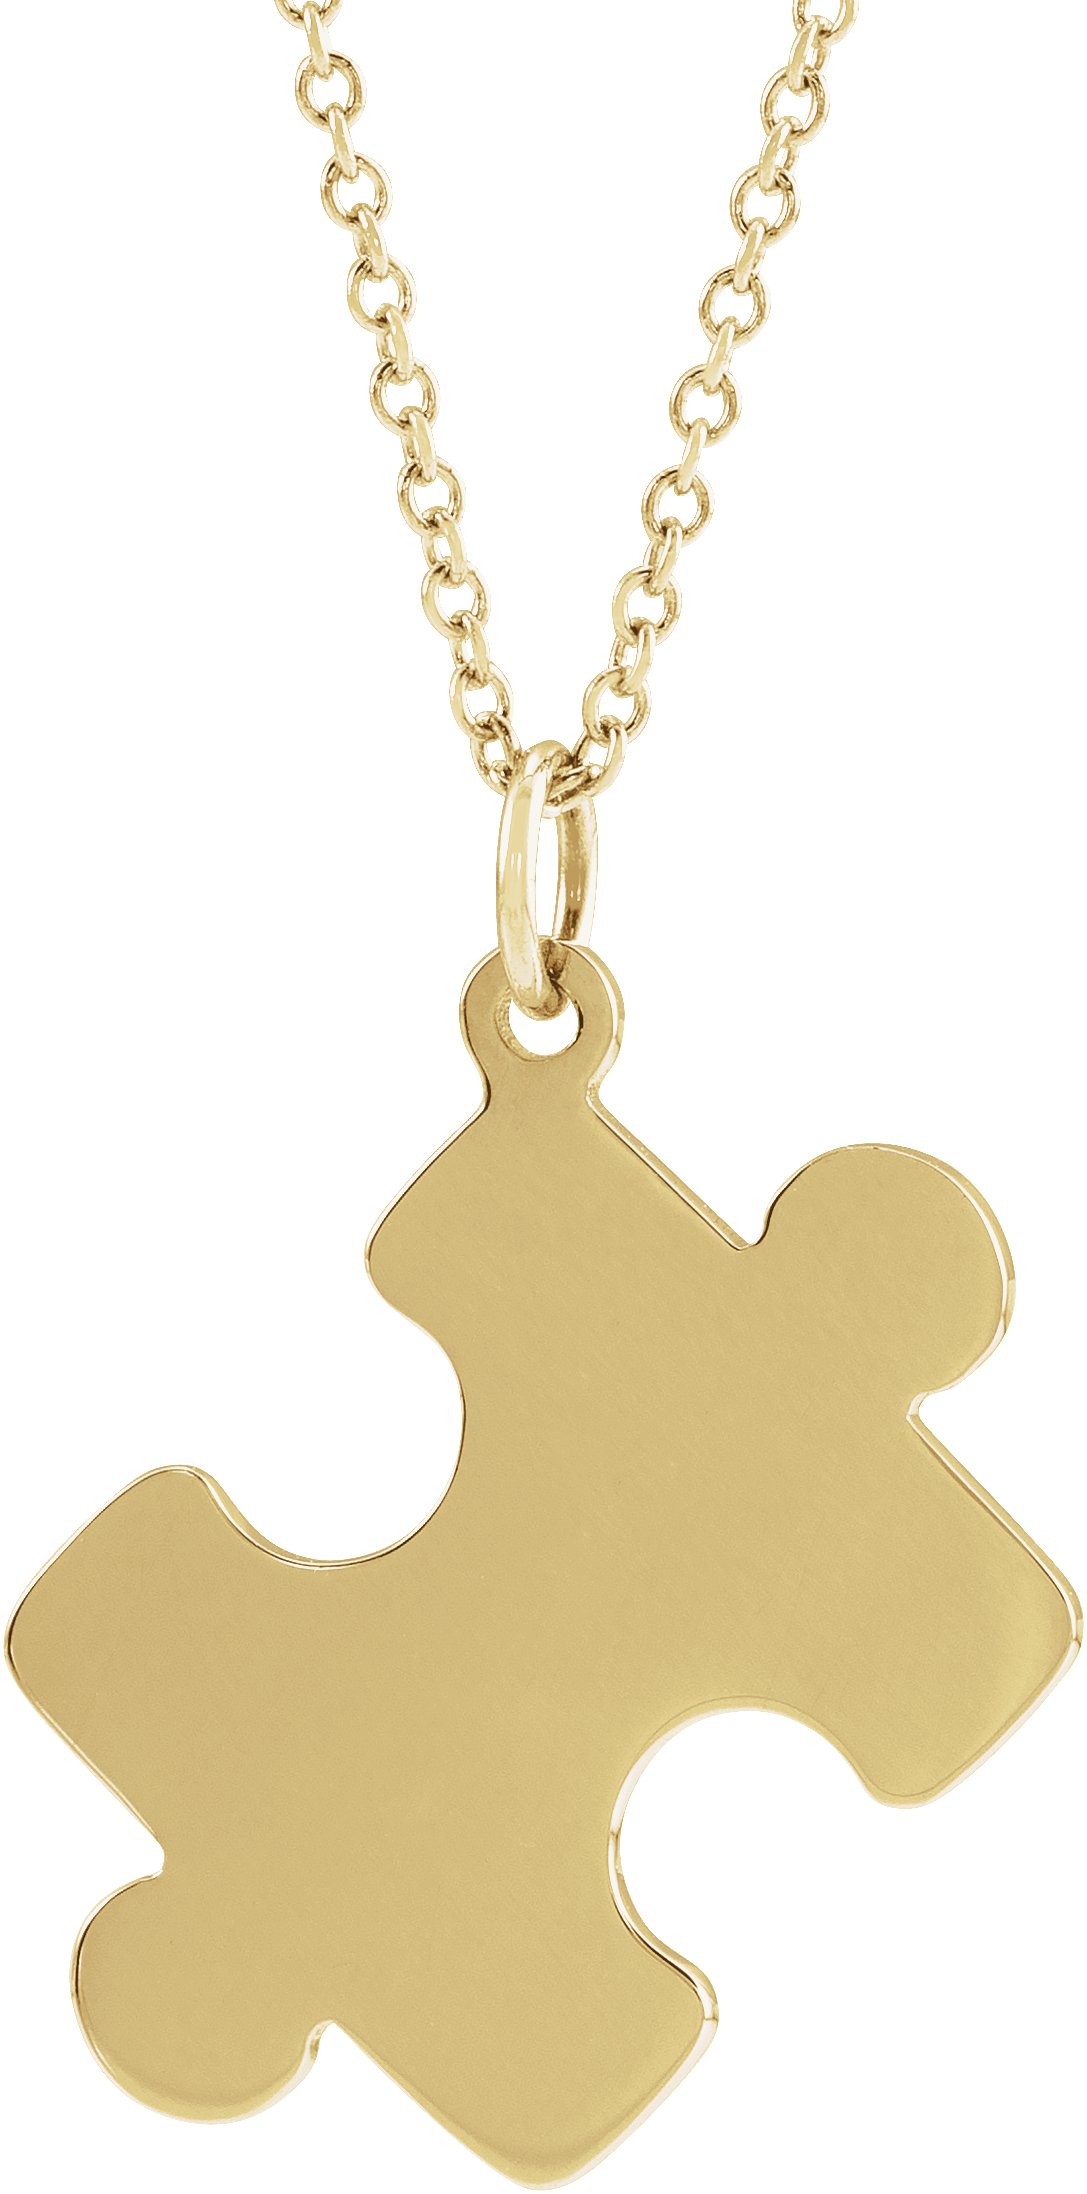 14K Yellow 15.65x12 mm Puzzle Piece 16-18" Necklace